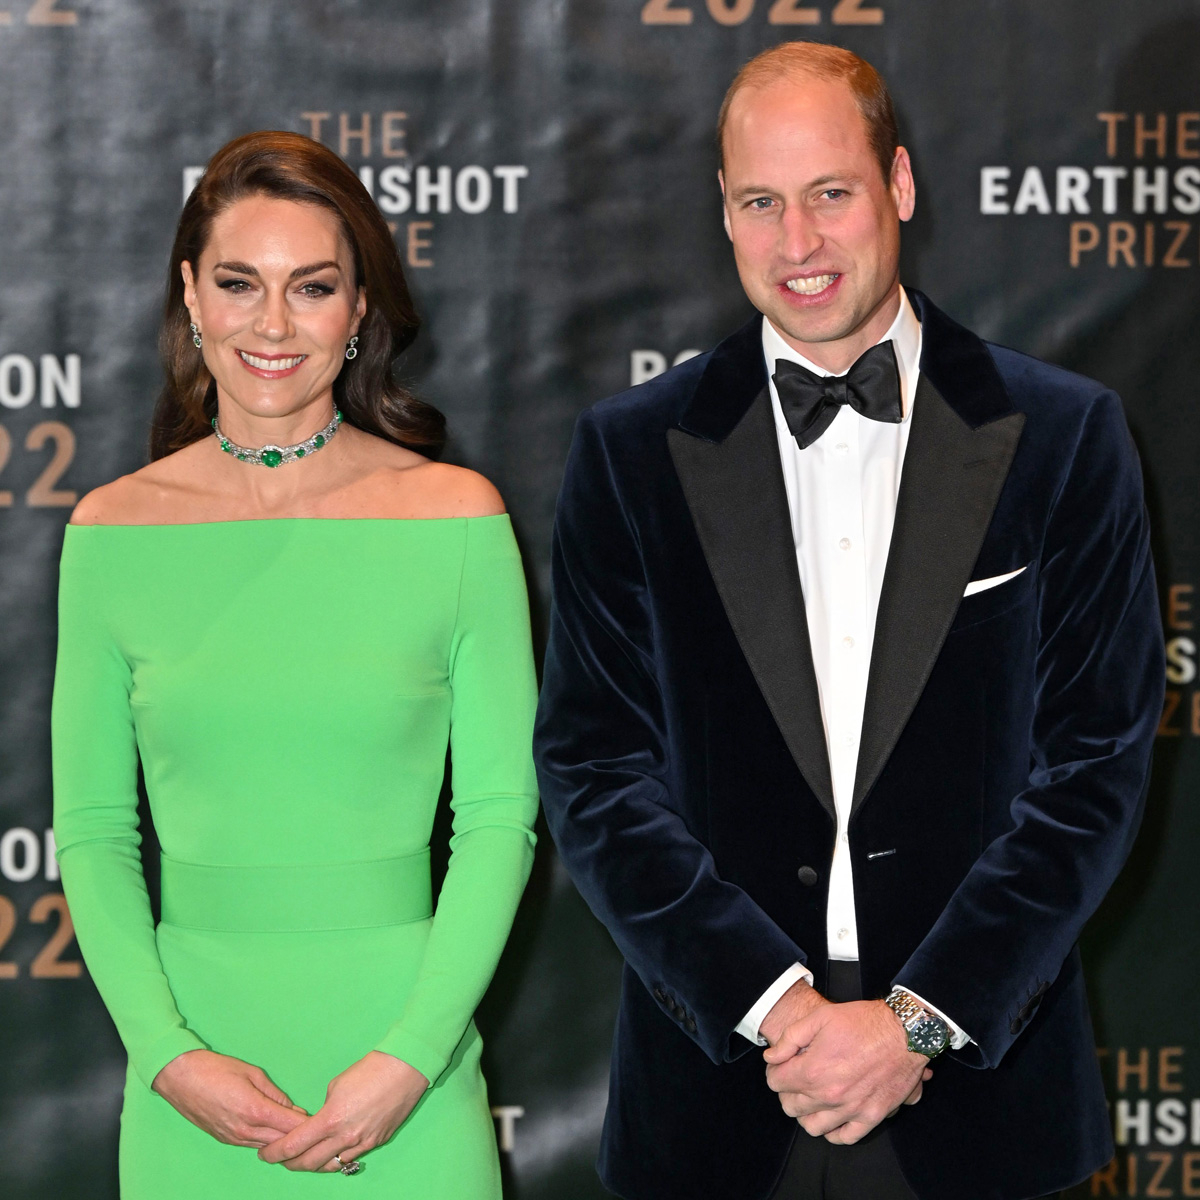 Shailene Woodley, David Beckham and More Join Prince William and Kate Middleton at Earthshot Ceremony – E! Online